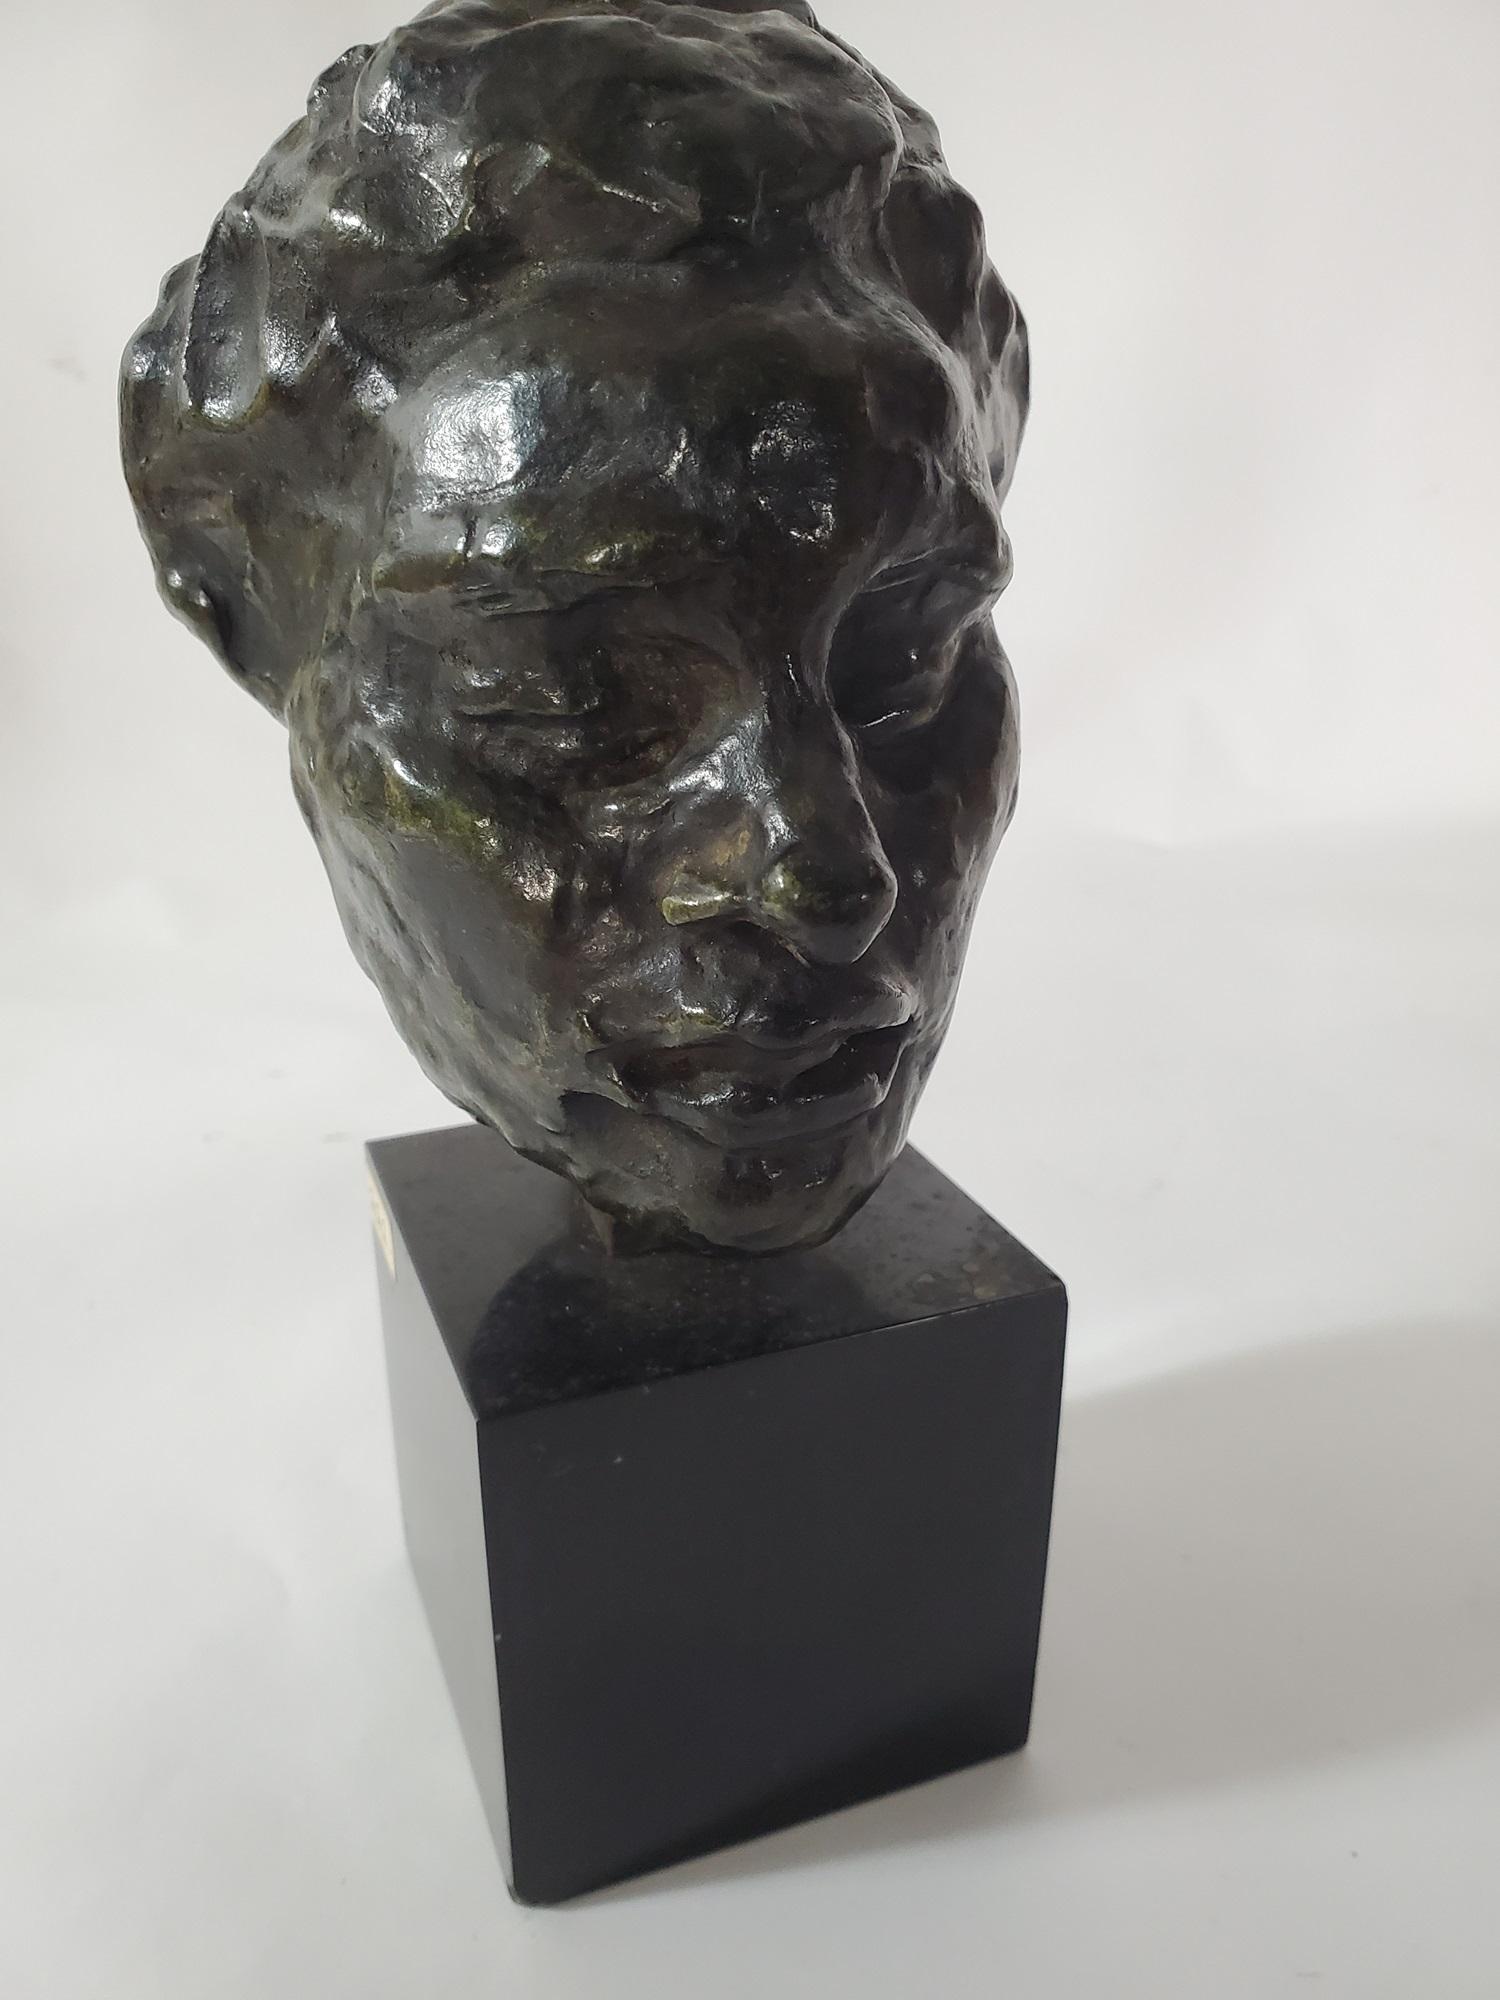 What materials did Auguste Rodin use for his sculptures?